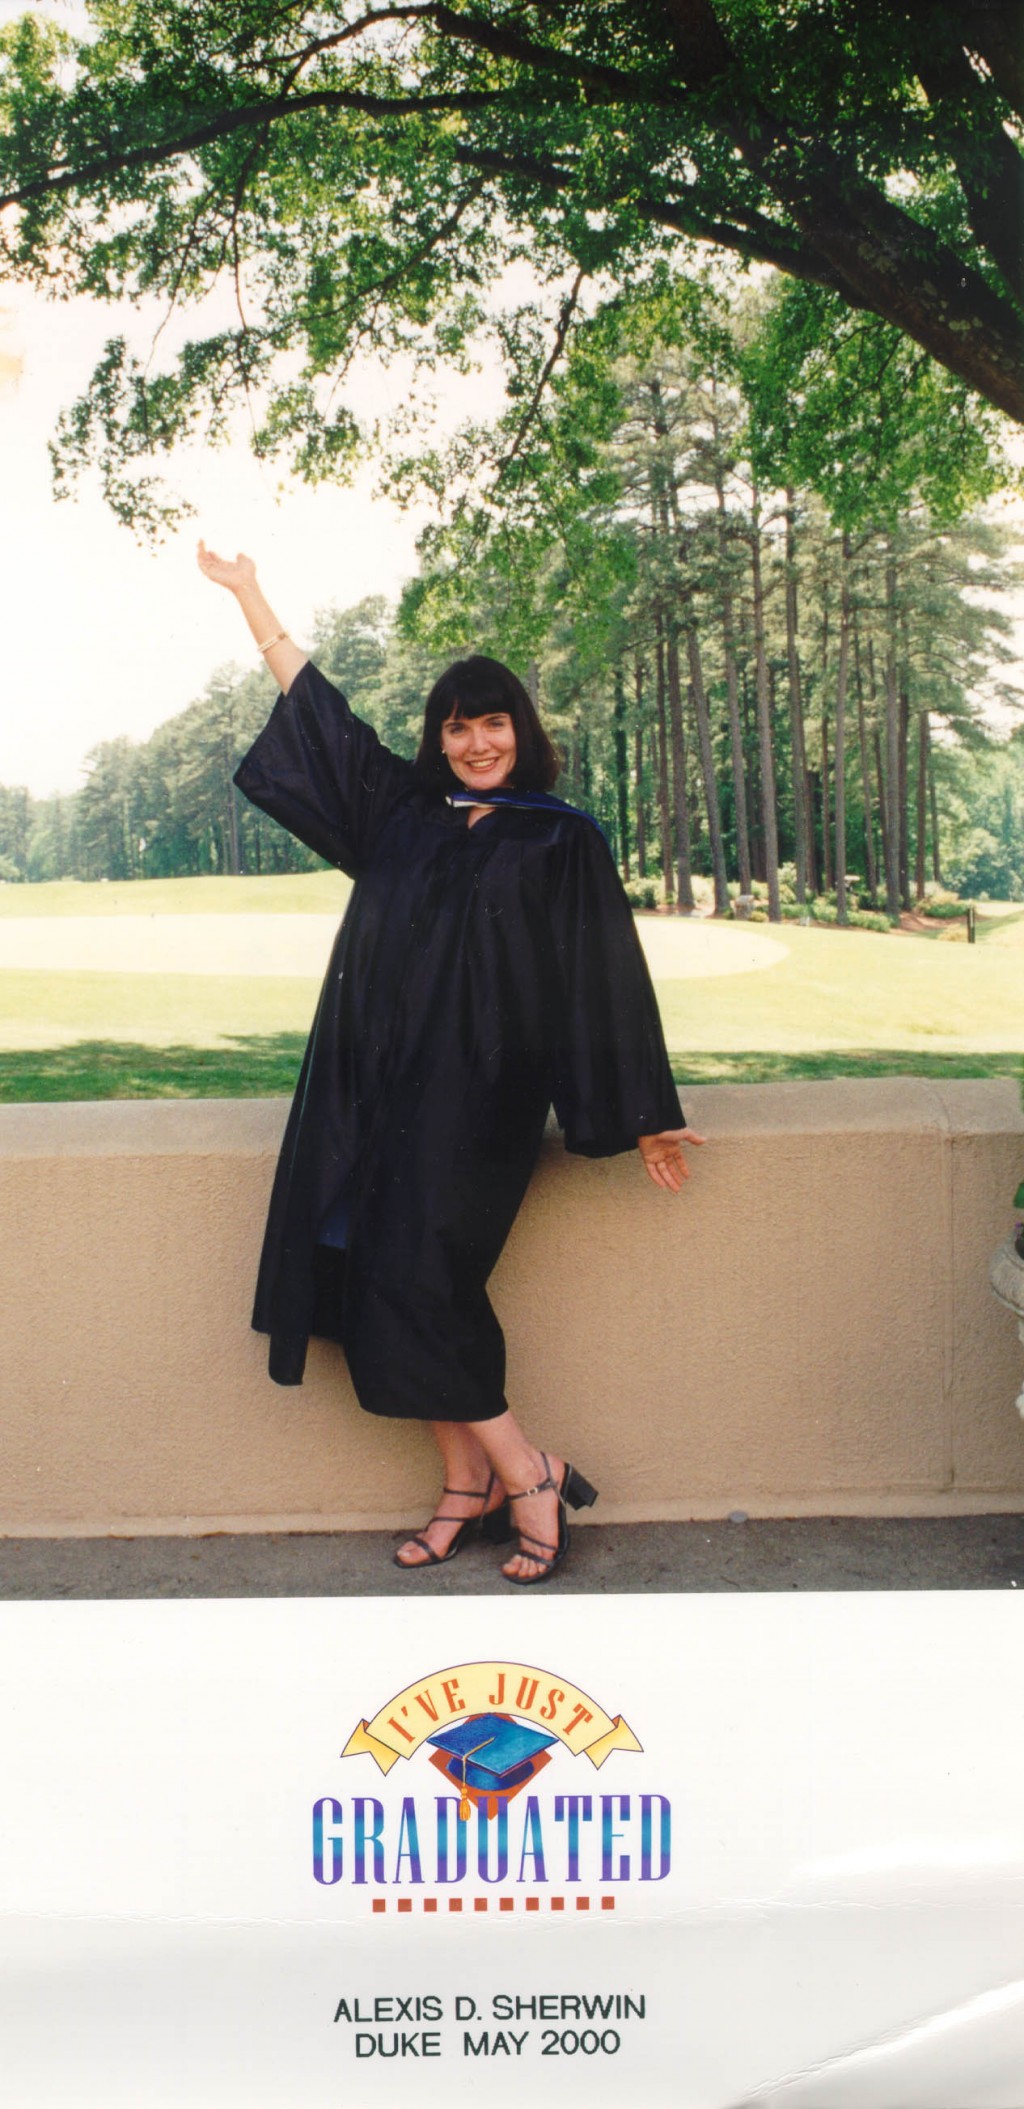 Blanka's granddaughter Alexis Danielle graduates from university in May 2000.